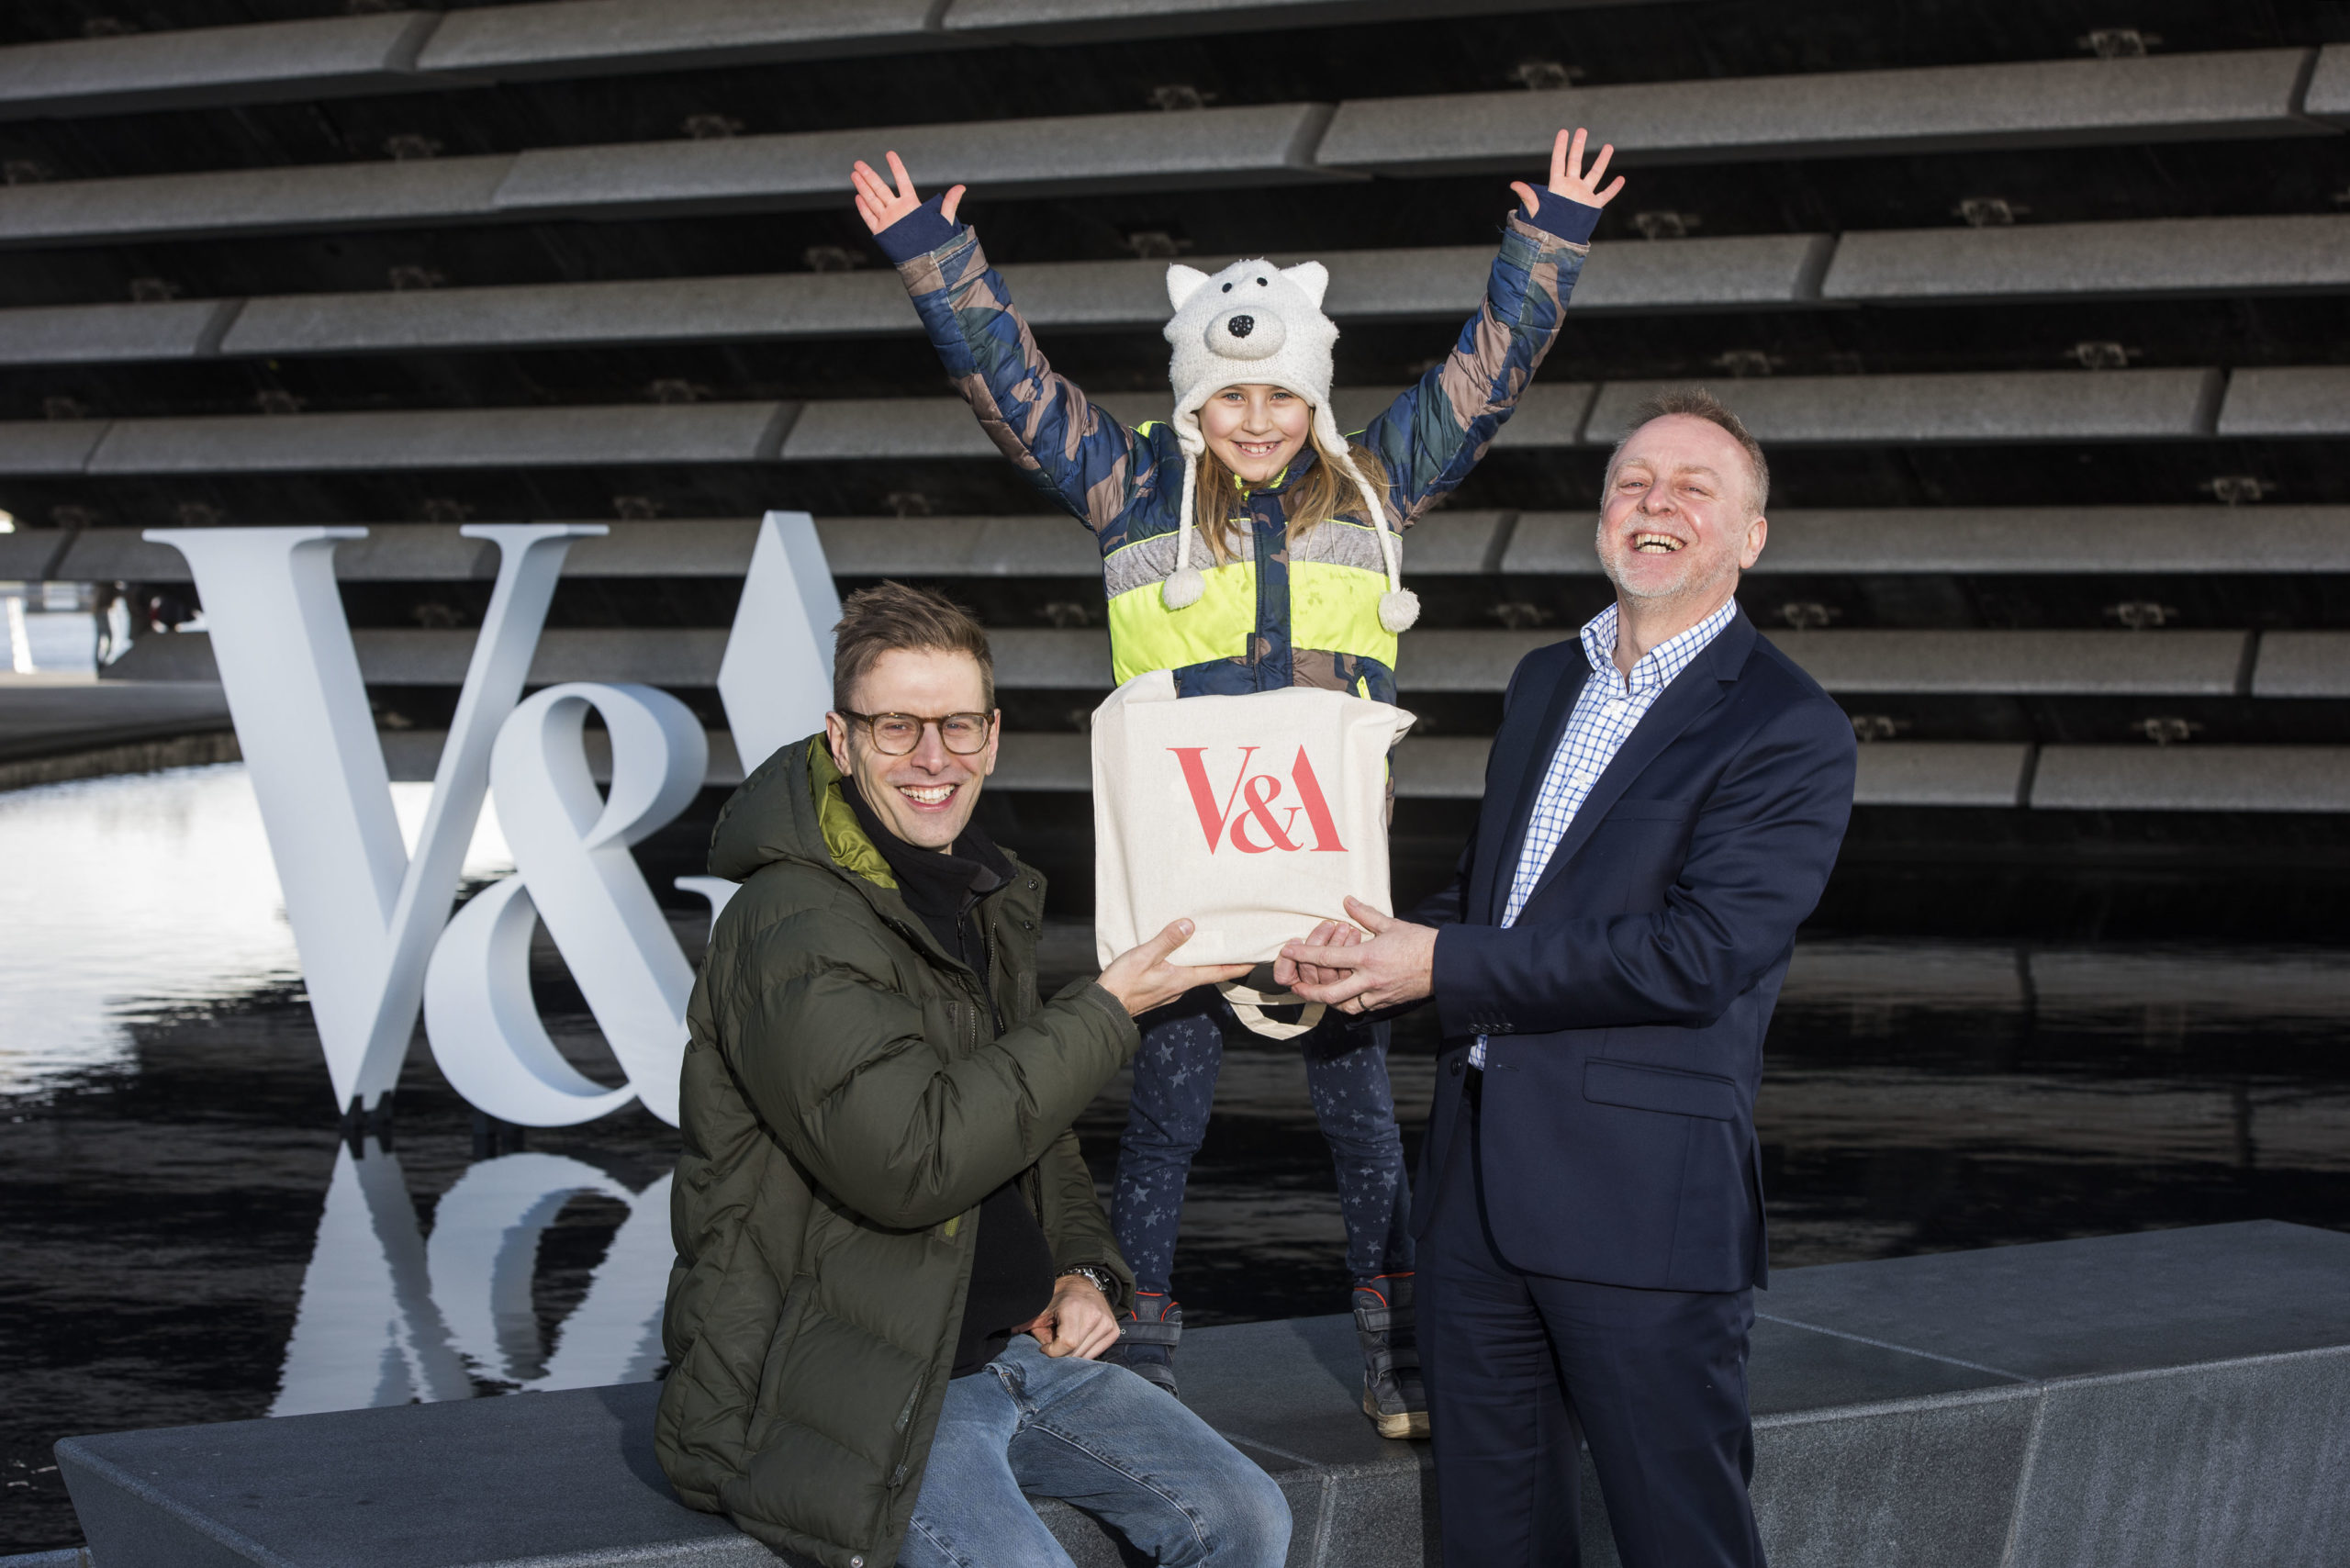 Philip Long, director of V&A Dundee, presents Jan Becker and his daughter Nalani, 7, from Berlin with a goody bag.